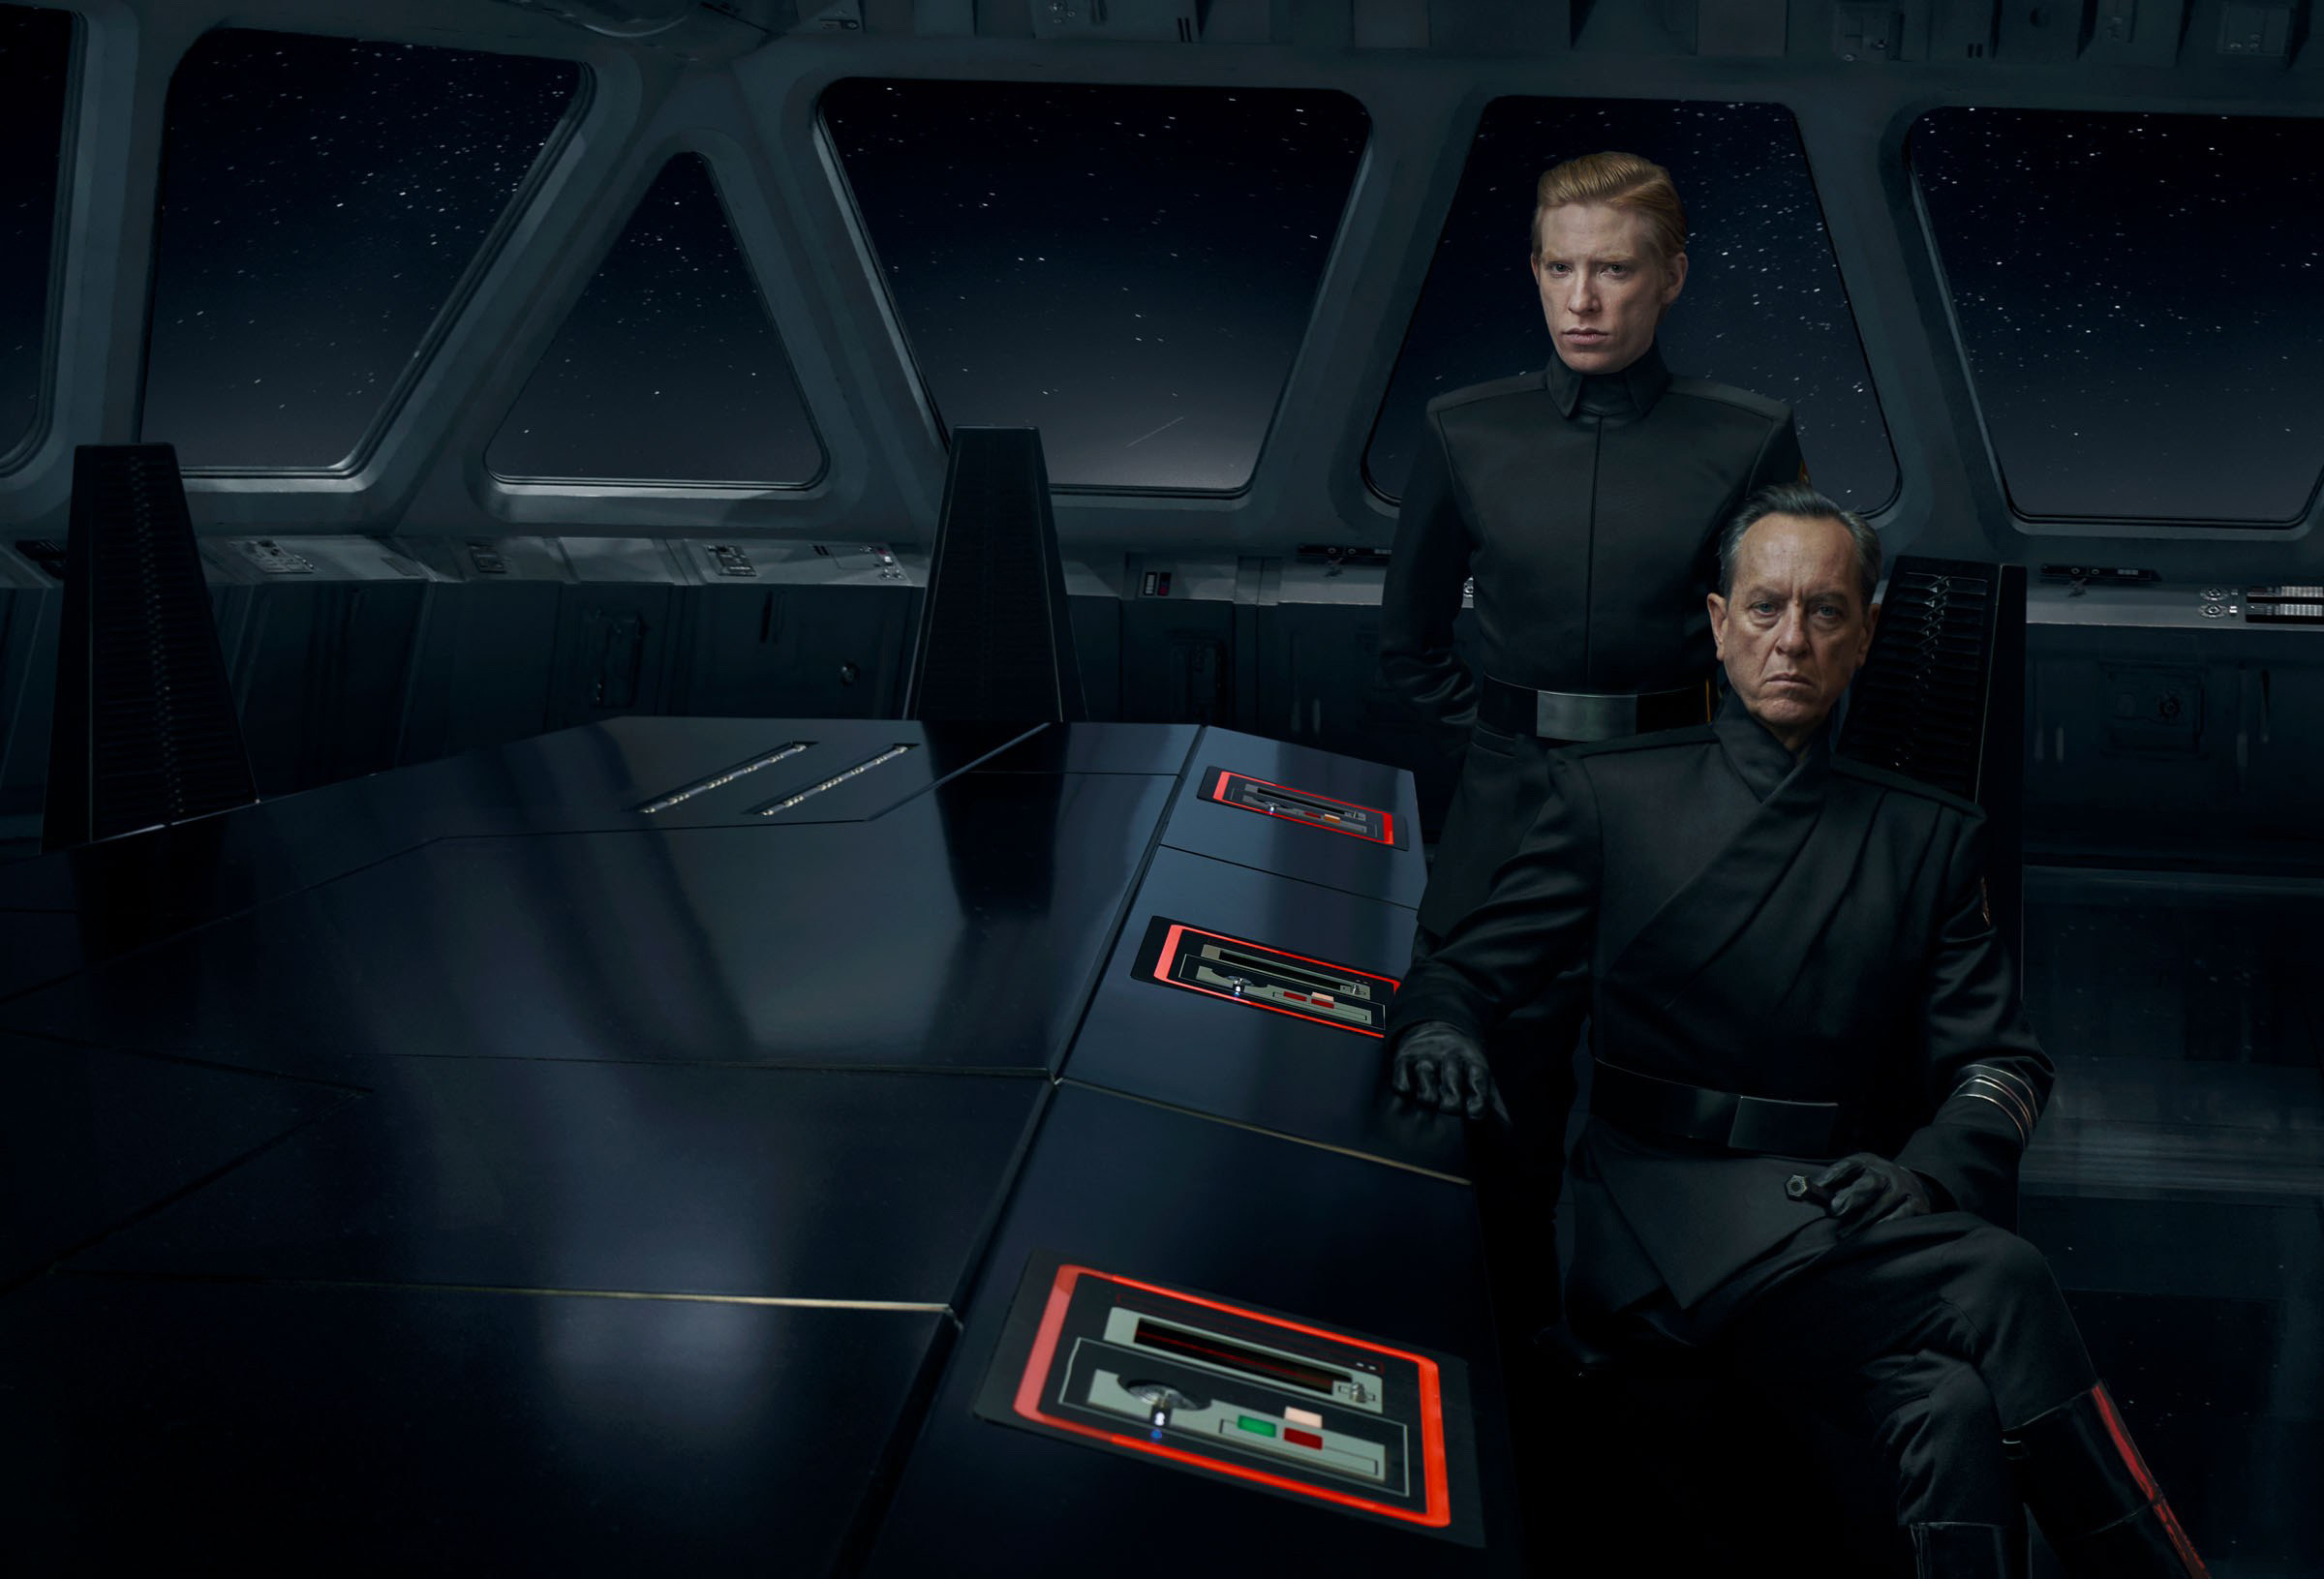 Star Wars: The Rise Of Skywalker: Domhnall Gleeson as General Hux and Richard E. Grant as Allegiant General Pryde. 2400x1640 HD Wallpaper.